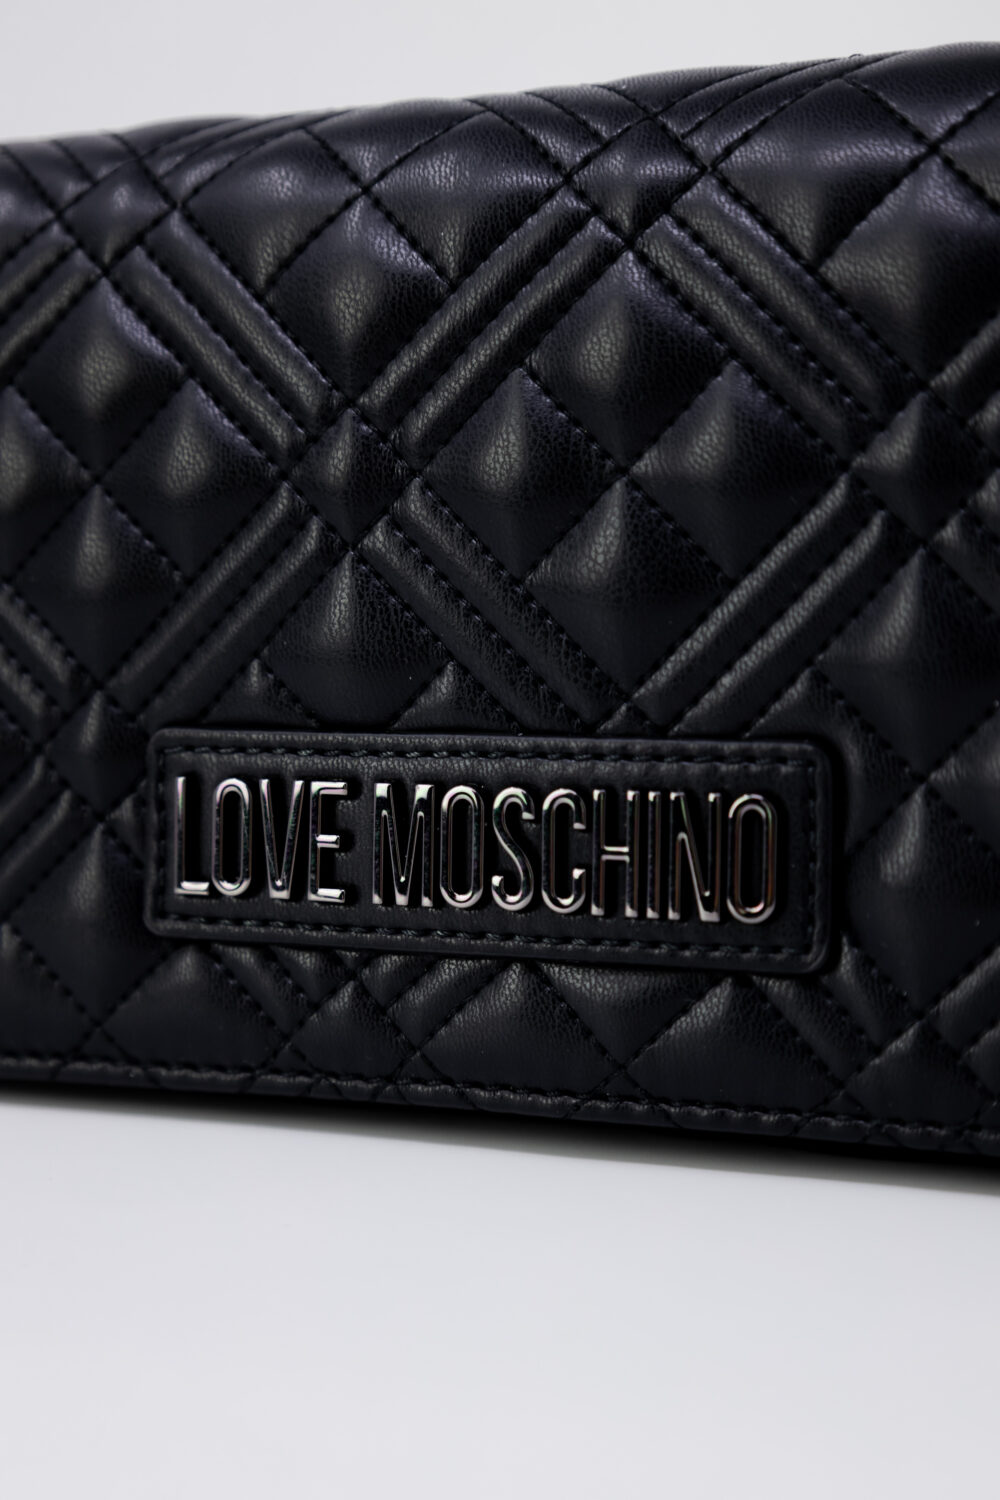 Borsa Love Moschino QUILTED PU Black Silver - Foto 2